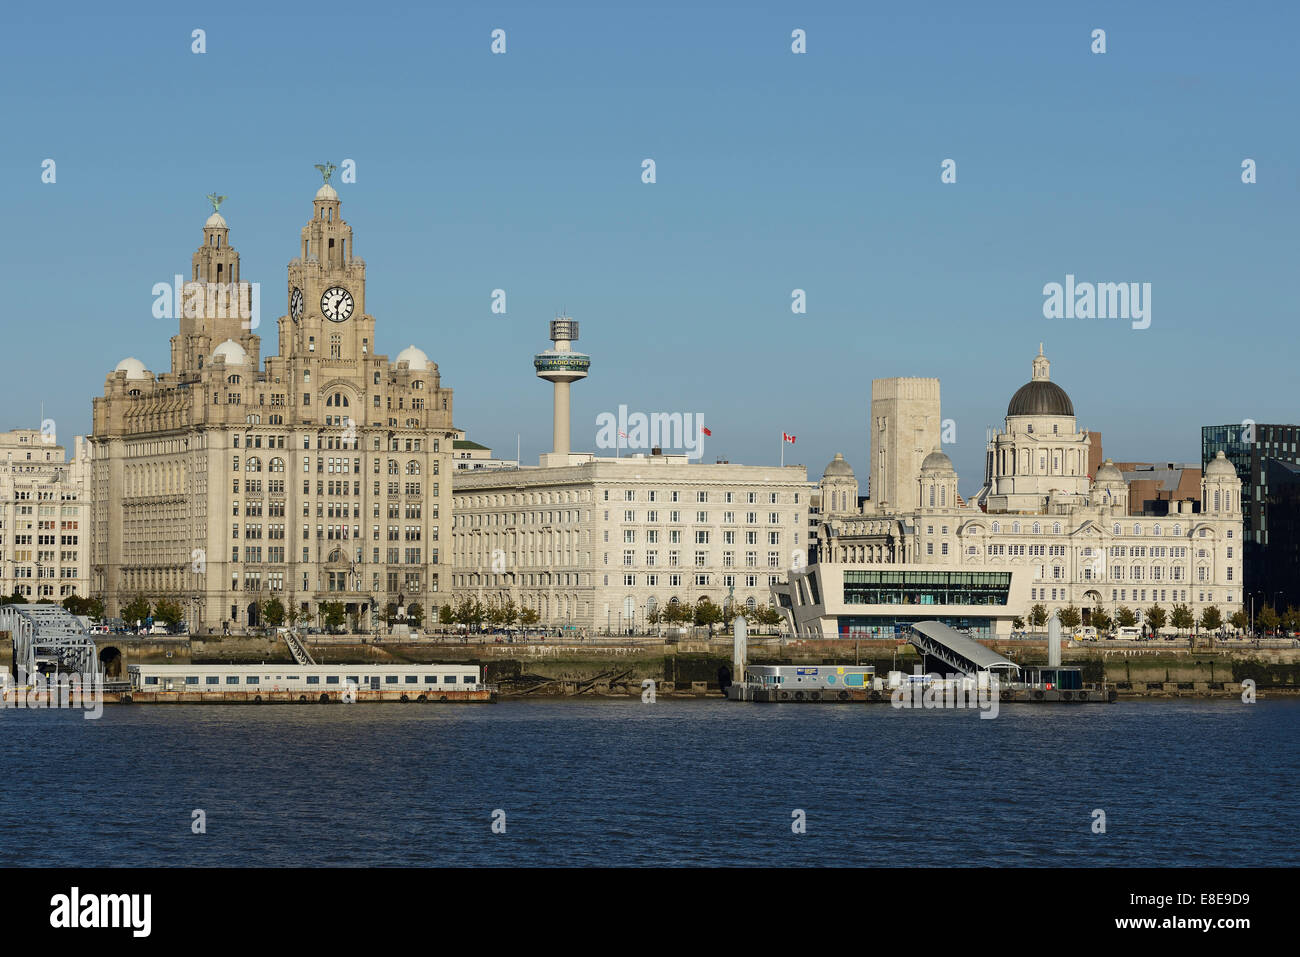 The Liver building and three graces on the Liverpool waterfront Stock Photo